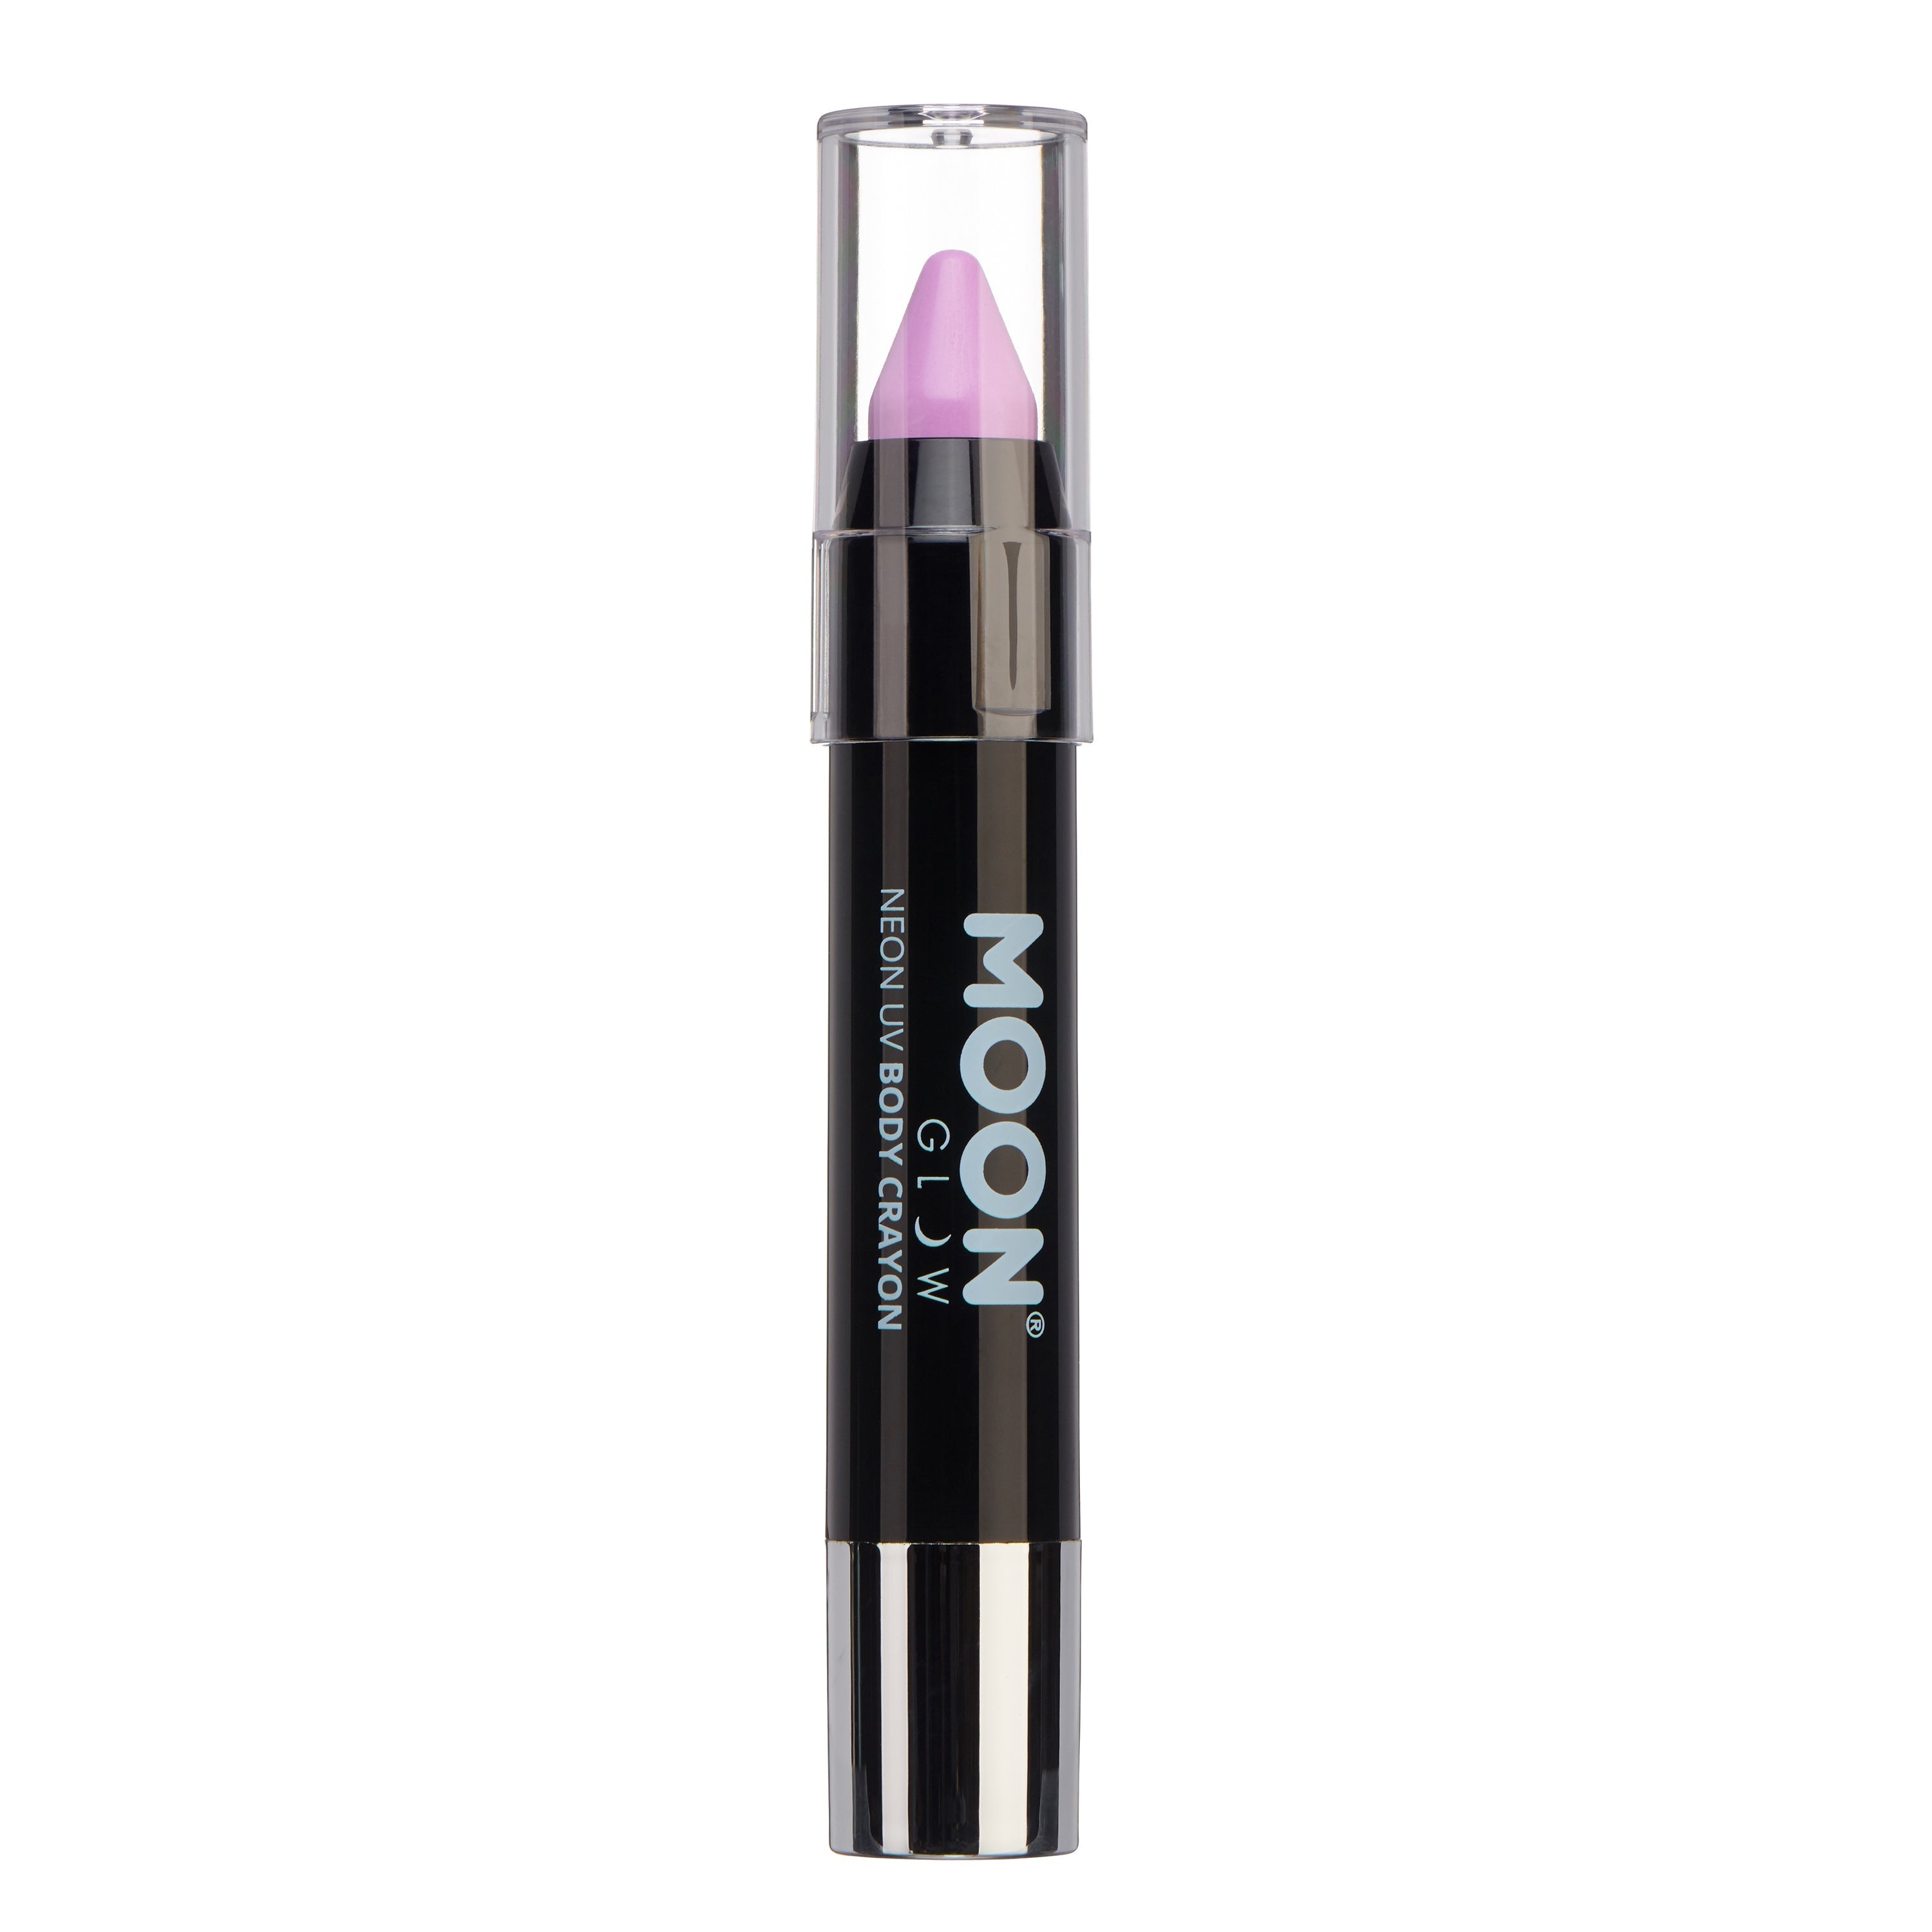 Pastel Lilac - Neon UV Glow Blacklight Face & Body Crayon, 3.5g. Cosmetically certified, FDA & Health Canada compliant and cruelty free.